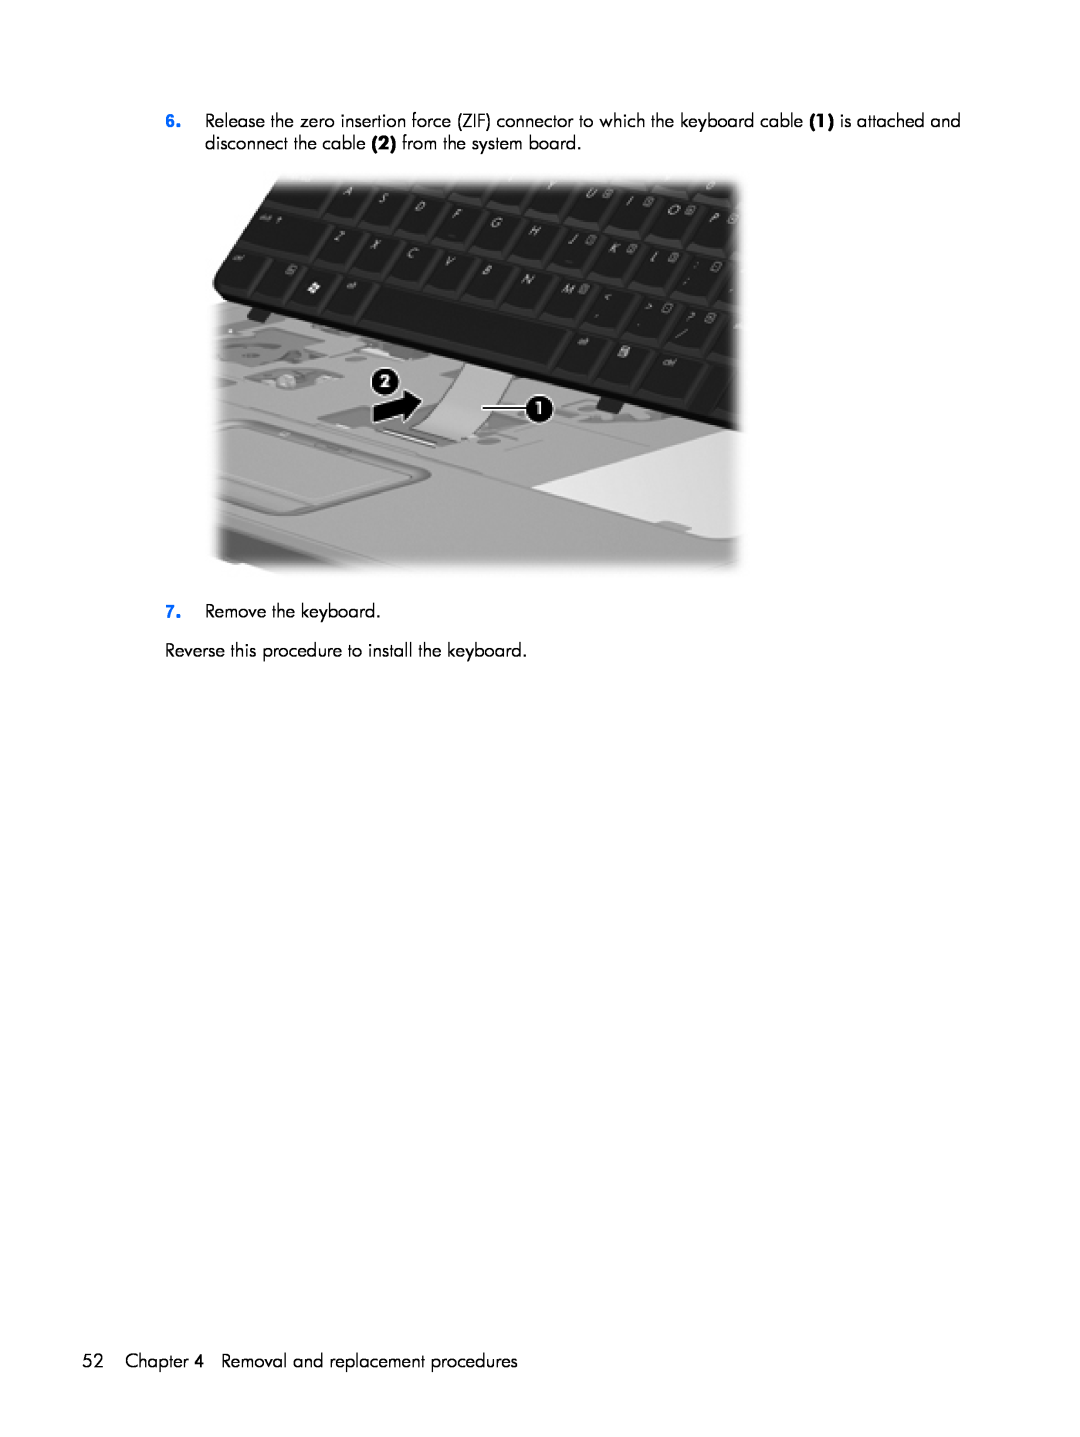 HP C768TU, C721TU Remove the keyboard Reverse this procedure to install the keyboard, Removal and replacement procedures 